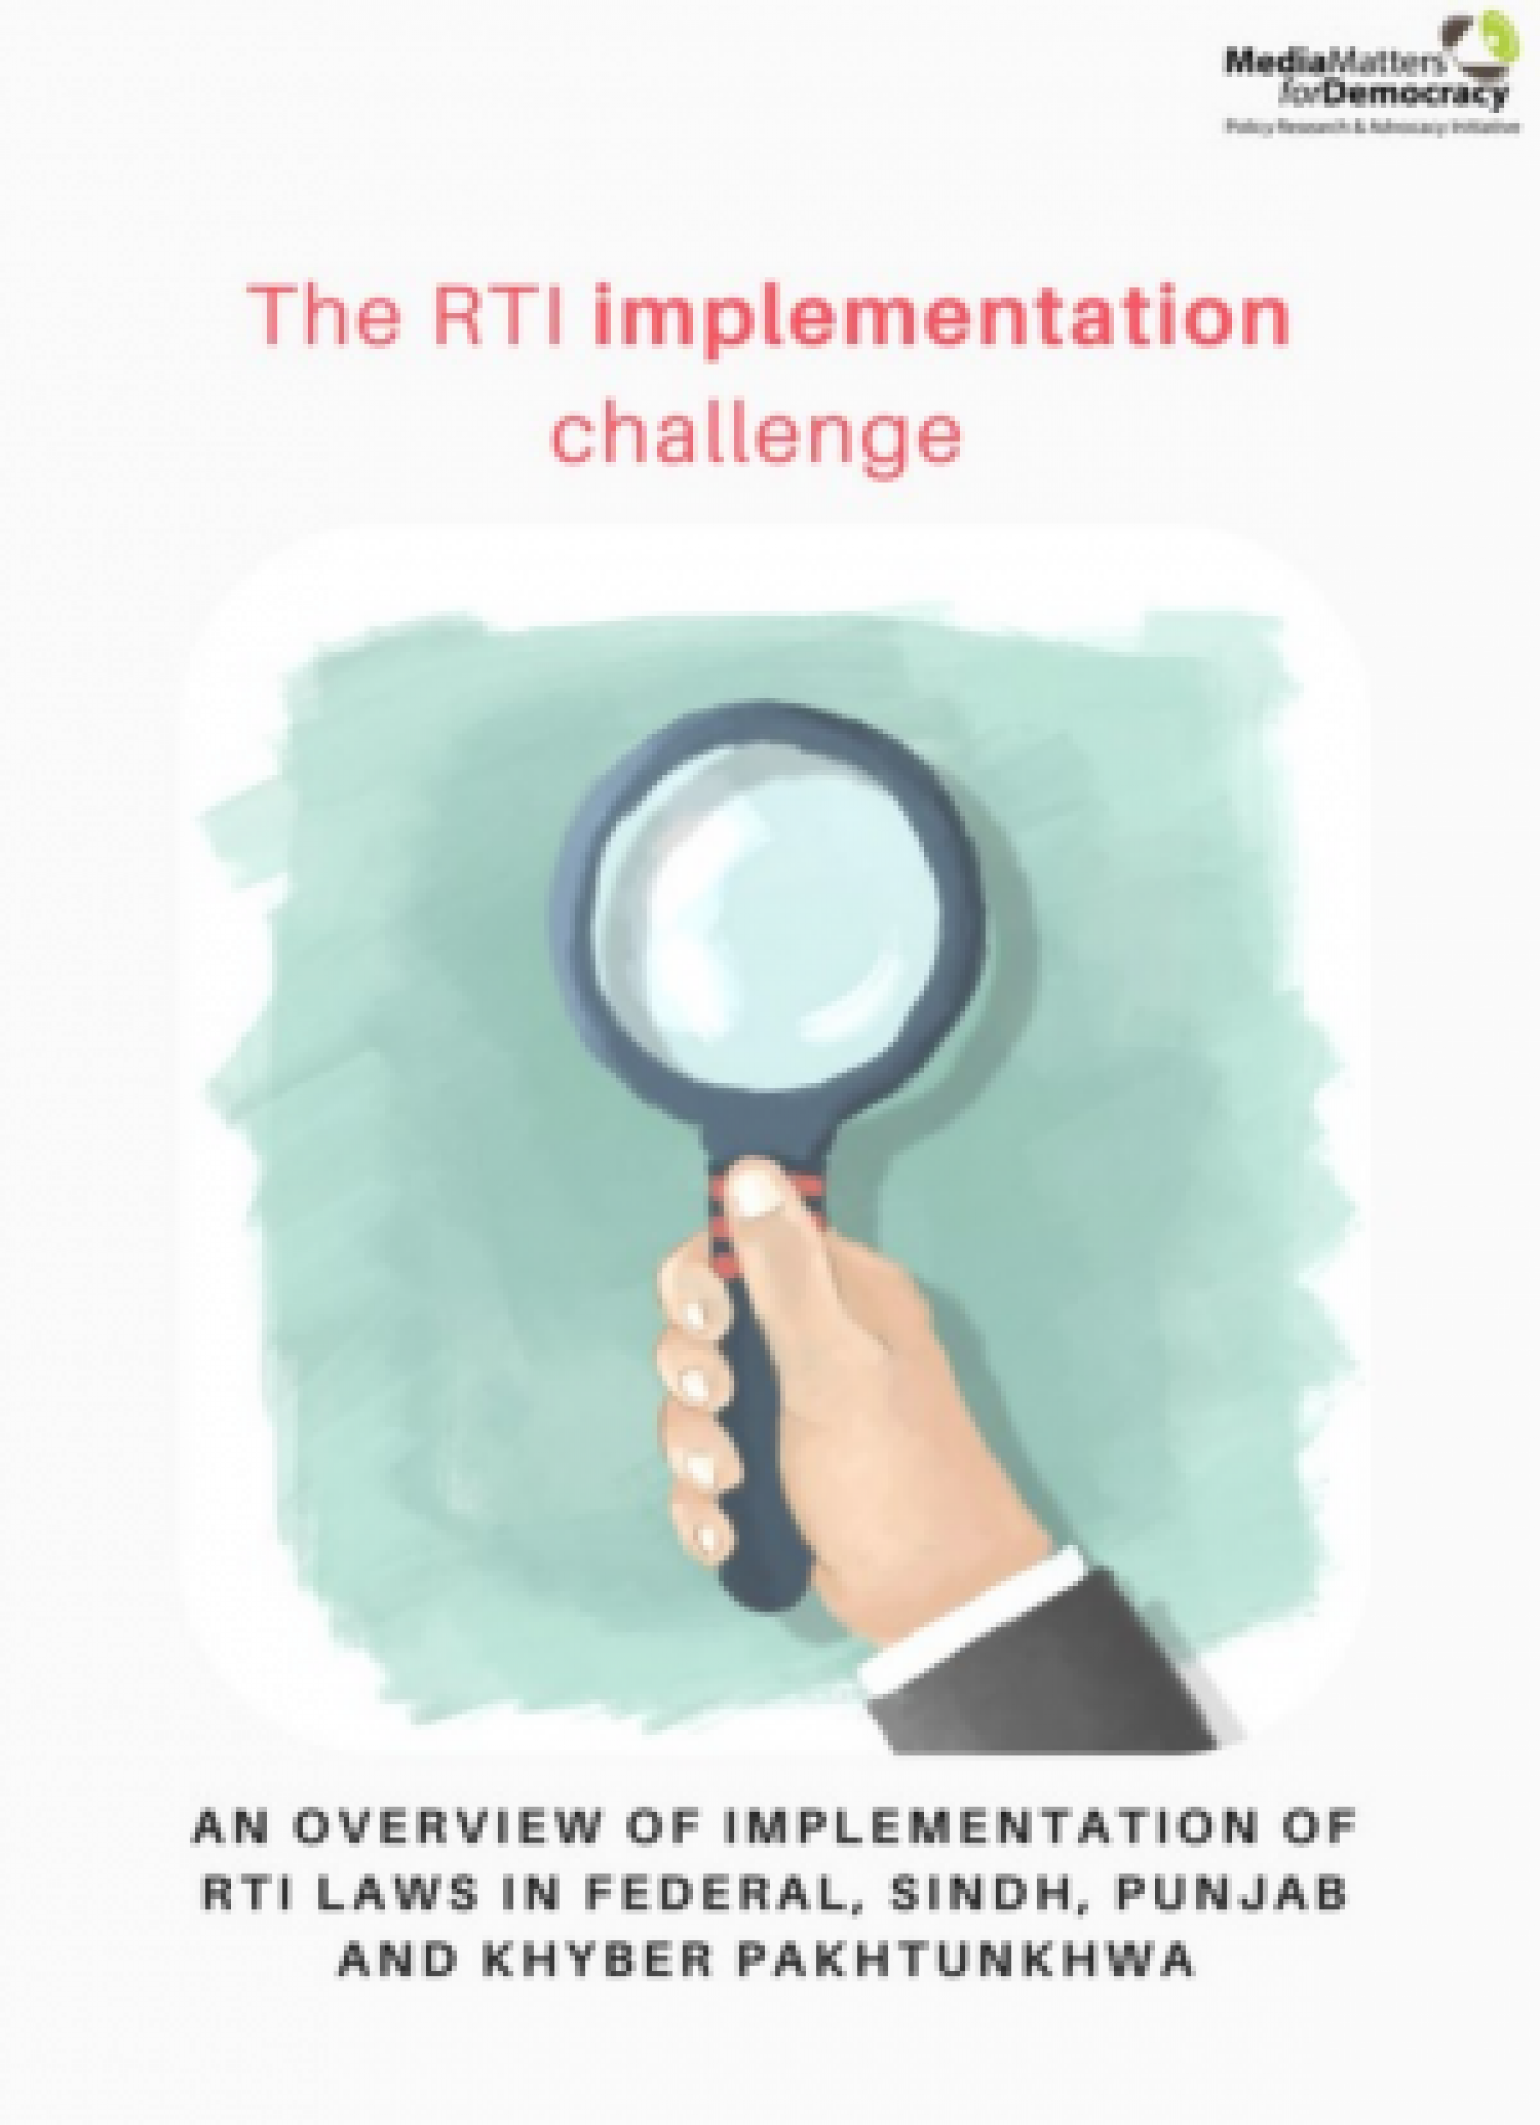 The RTI Implementation Challenge: An Overview of Implementation of RTI Laws in Federal, Sindh, Punjab, and KPK